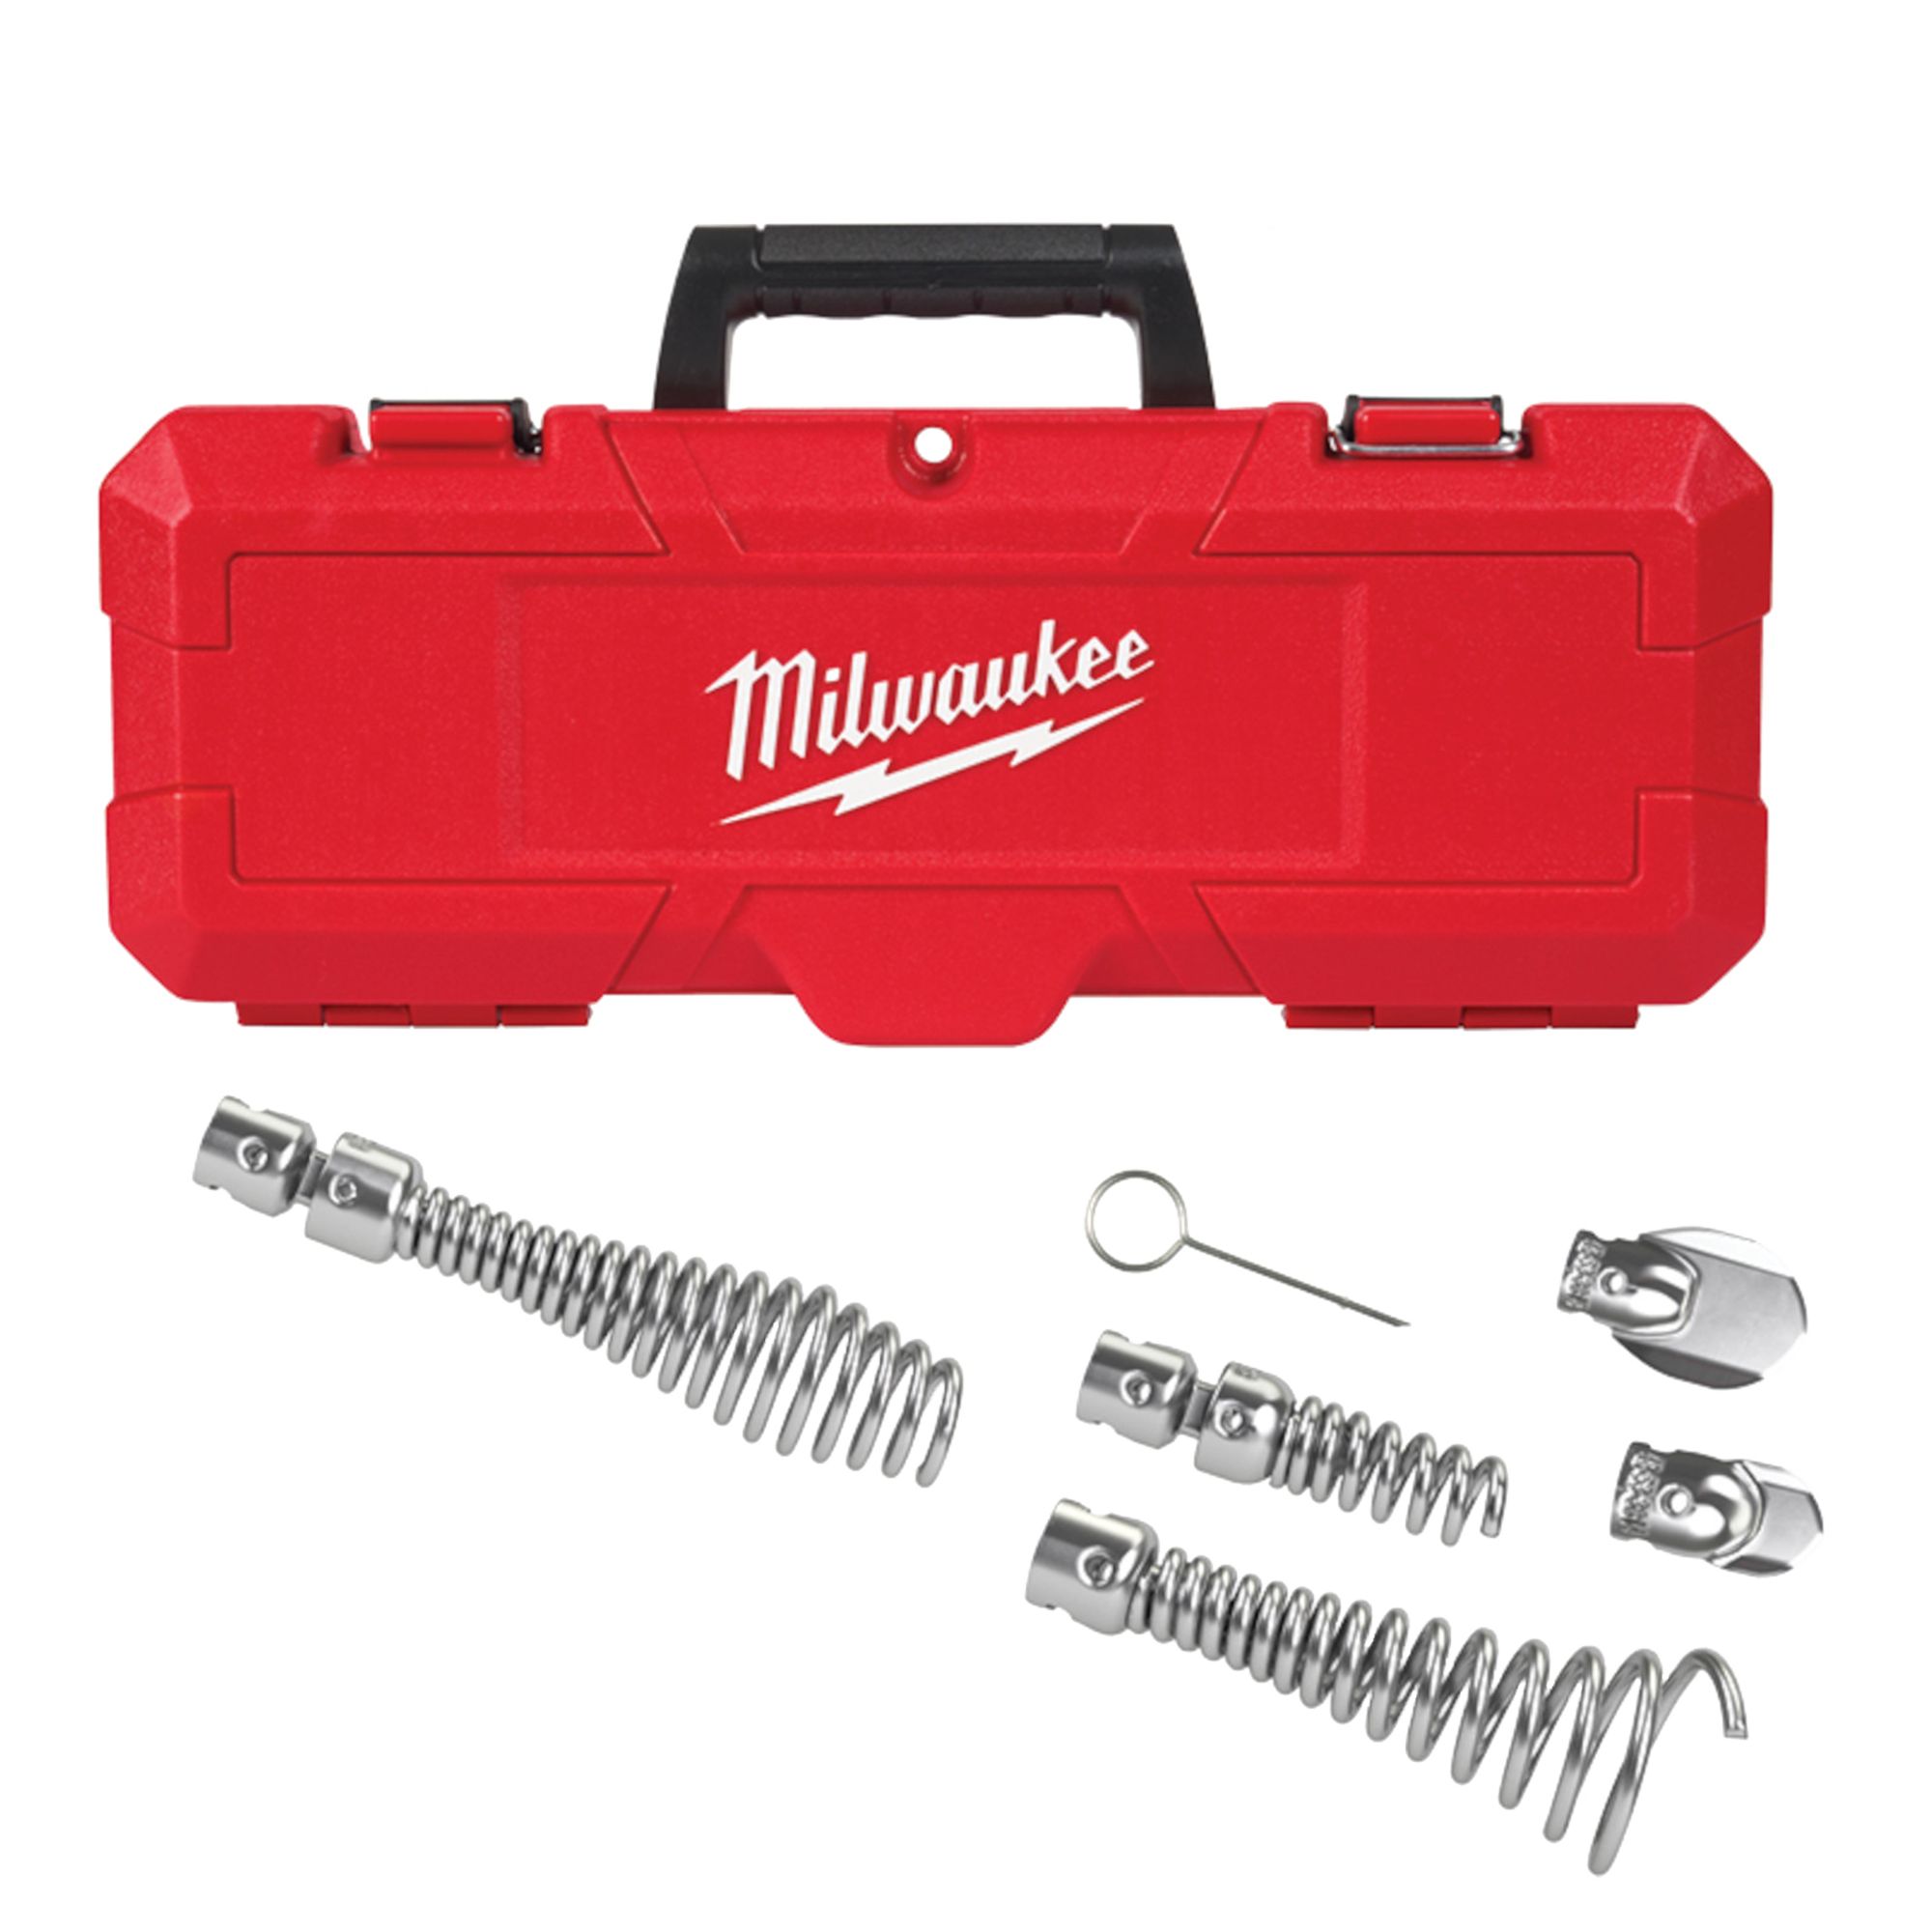 1-1/4" - 2" Head Attachment Kit for Milwaukee® 5/8" Sectional Cable